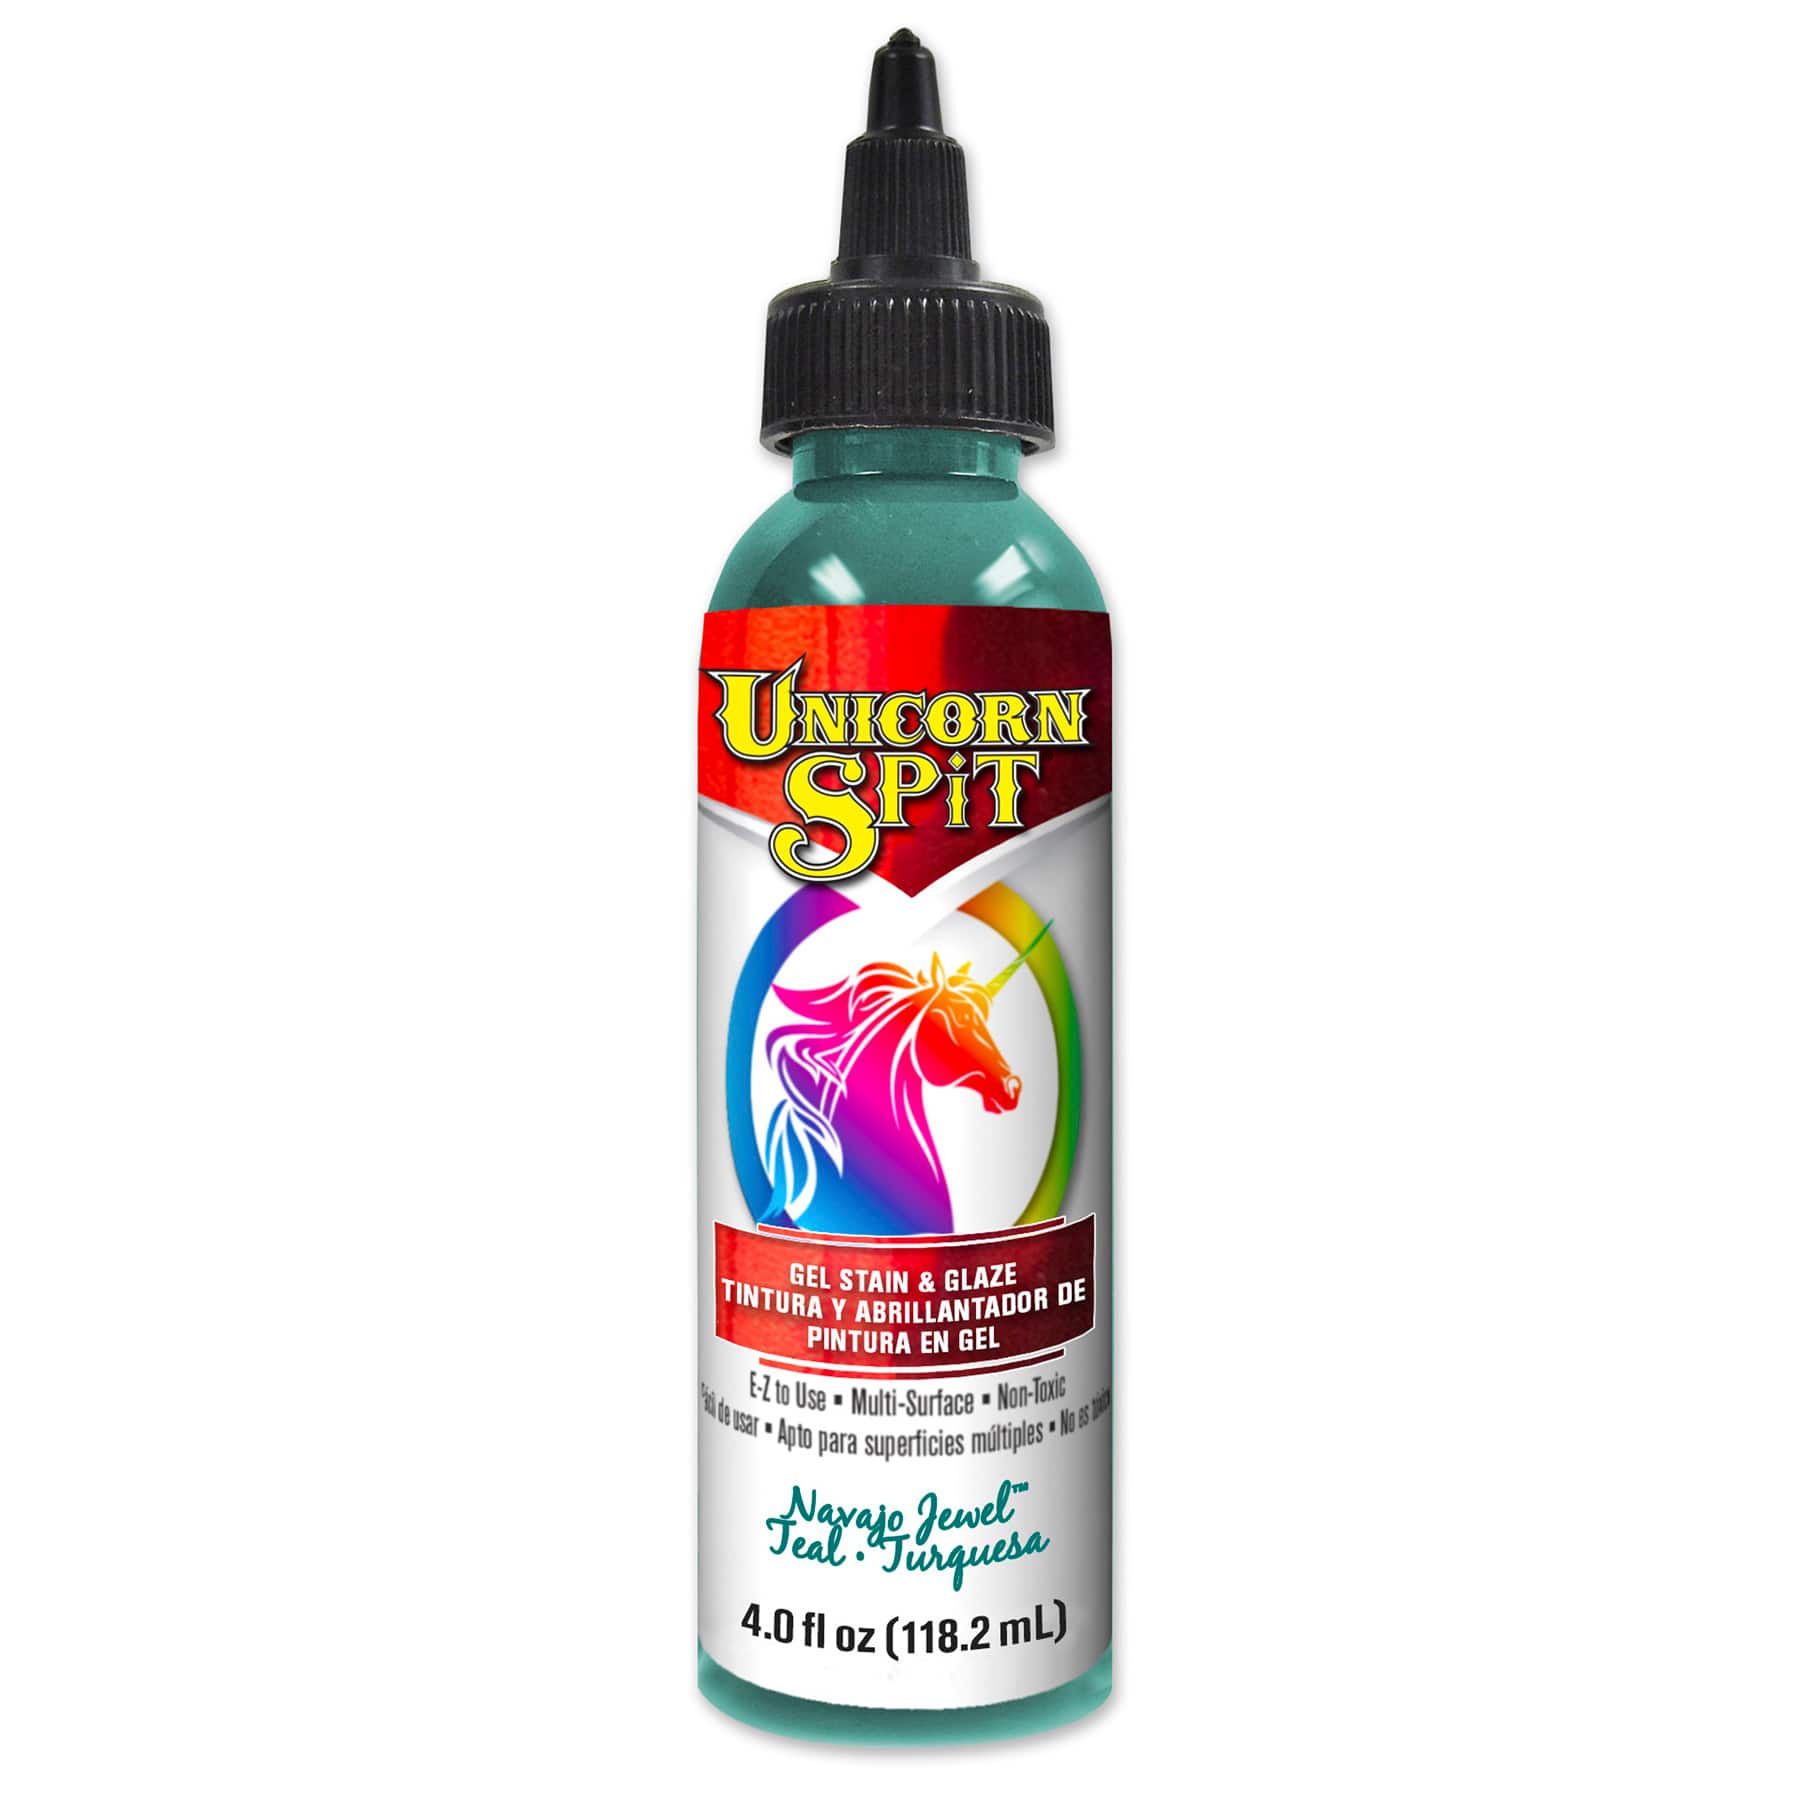 Unicorn SPiT Concentrated 6 oz. Jasmine Scented Stain Gel Bundles with  Trebbies